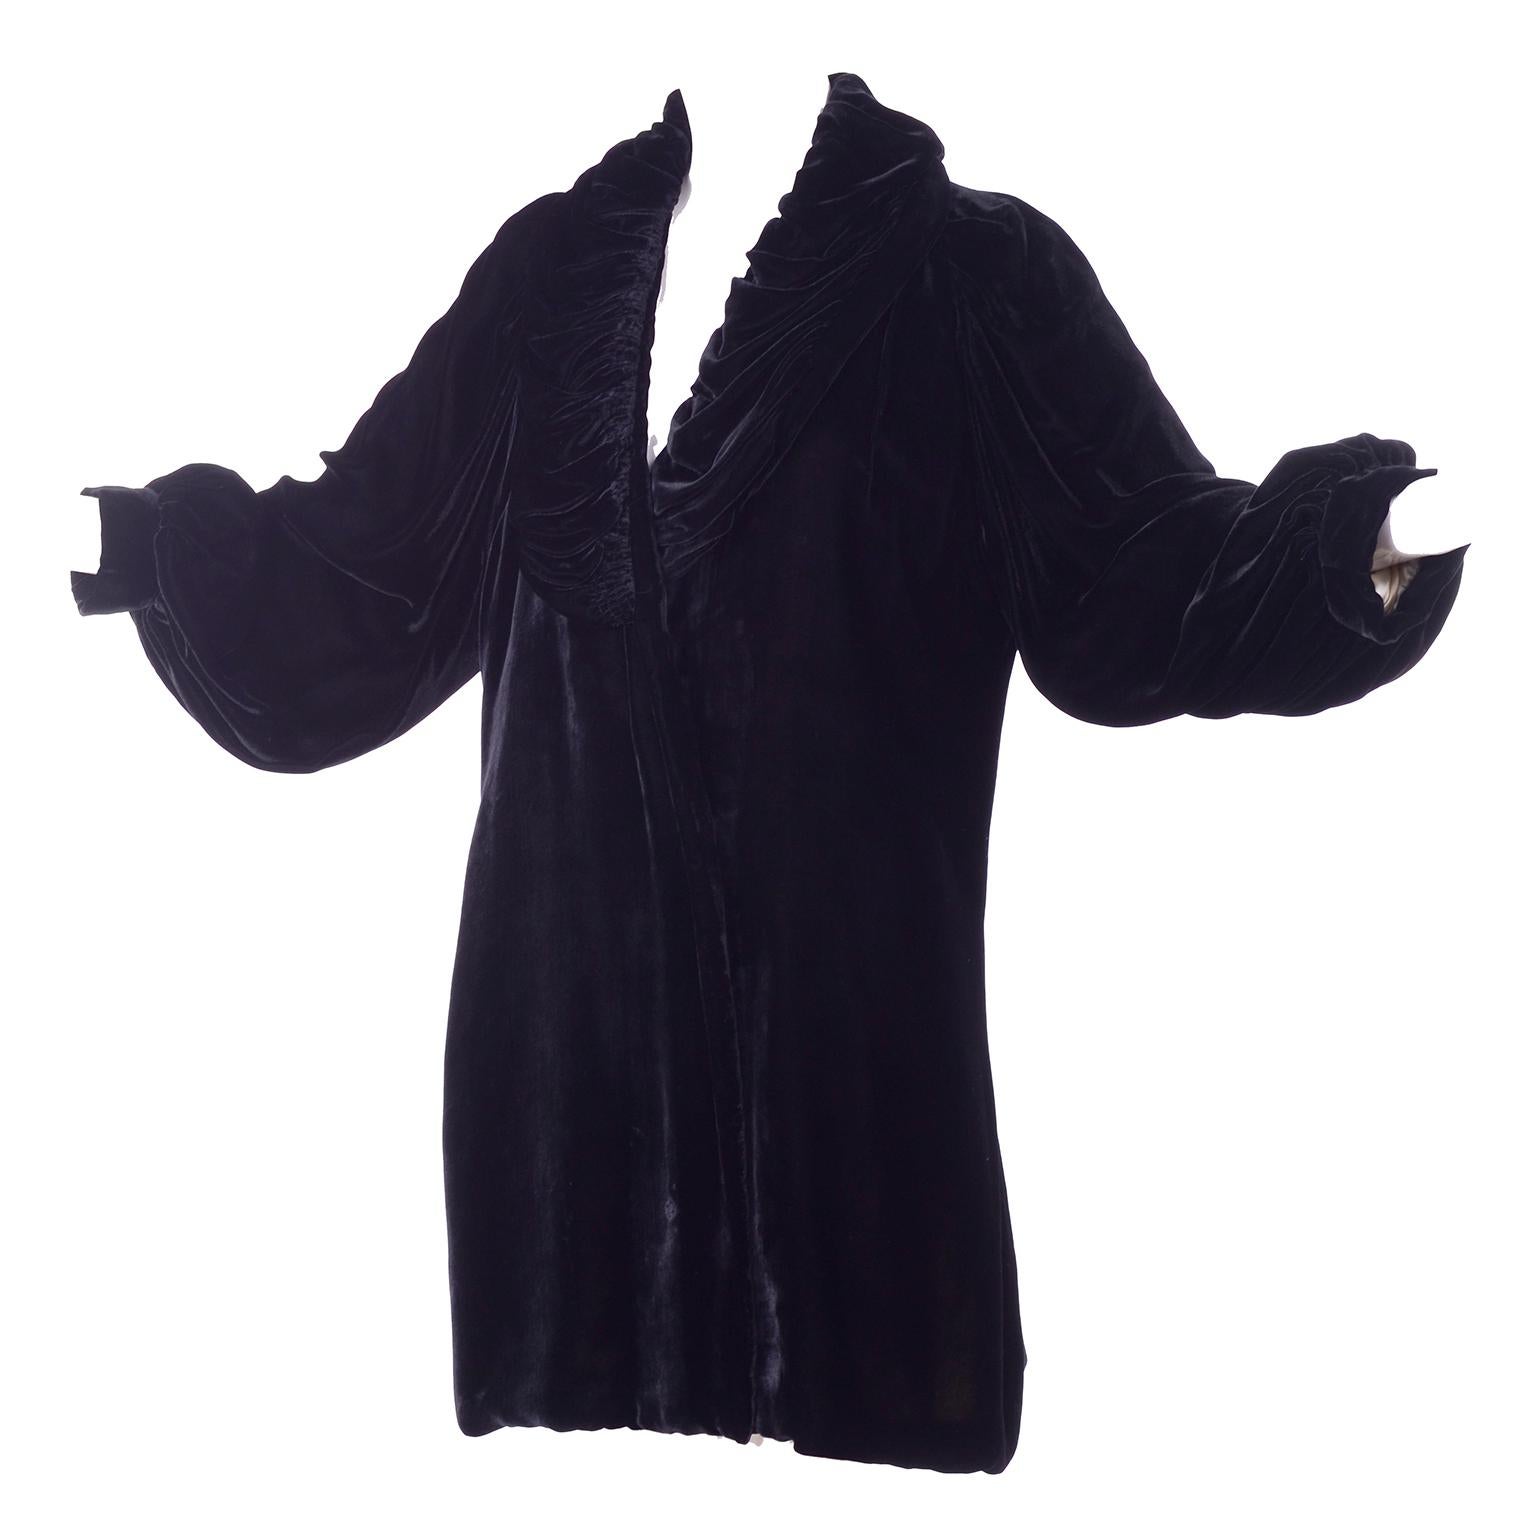 This is a gorgeous Edwardian vintage black velvet evening coat with a gathered puffy collar and puff sleeves. The coat is beautifully lined in pale pink silk satin. This coat has a tie on the inside that closes one side but no closure for the other.